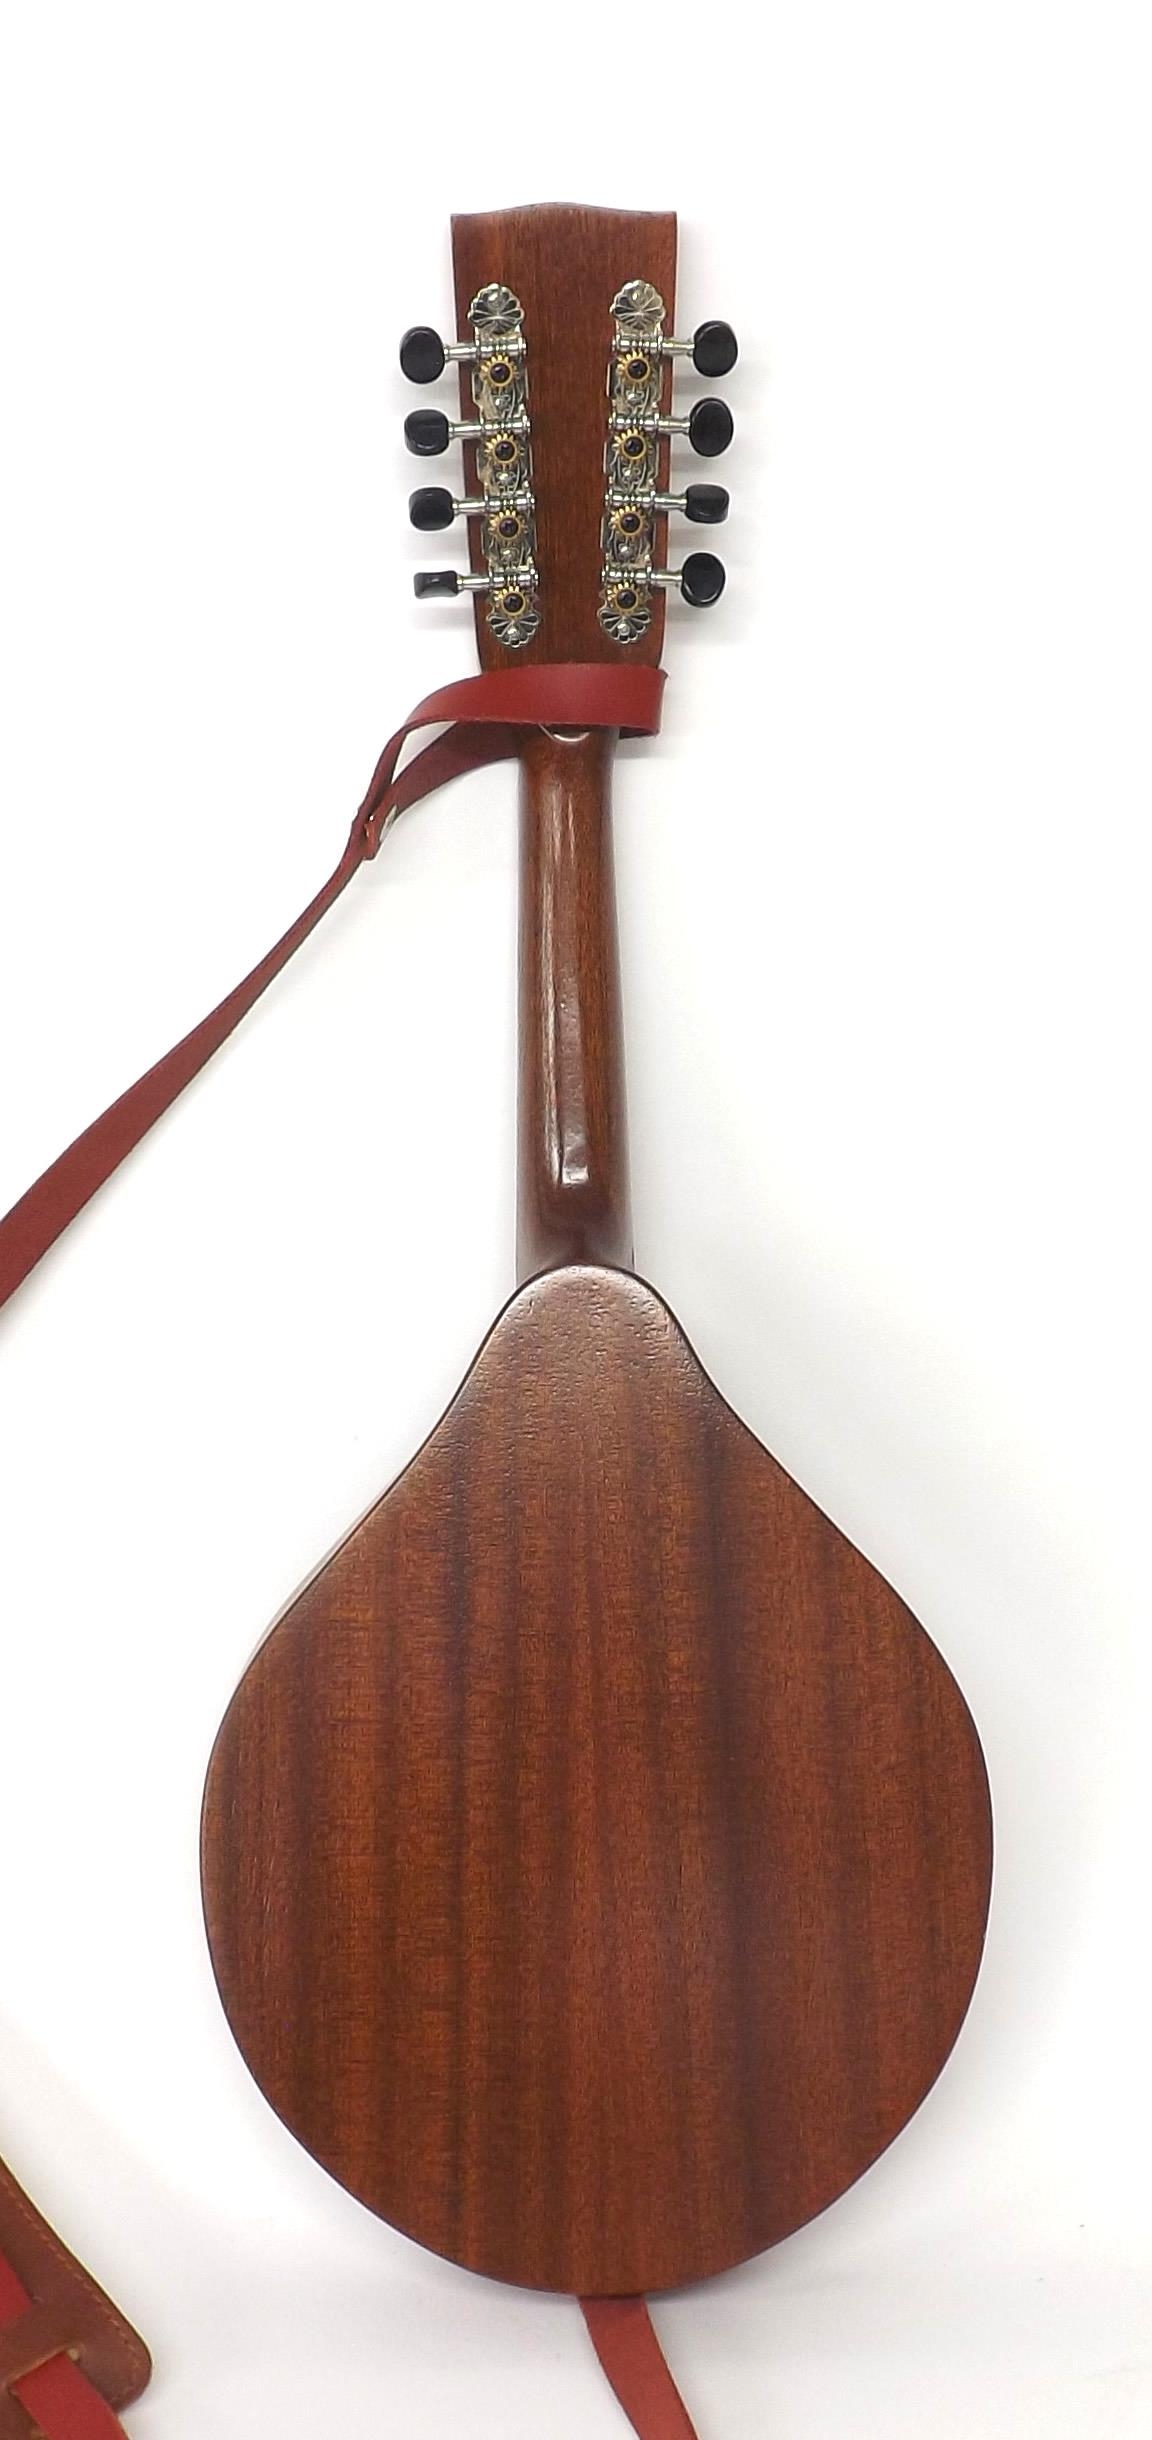 Contemporary mandolin by and labelled Ashbury, model no: AM130..., with pear shaped body and Ashbury - Image 2 of 3